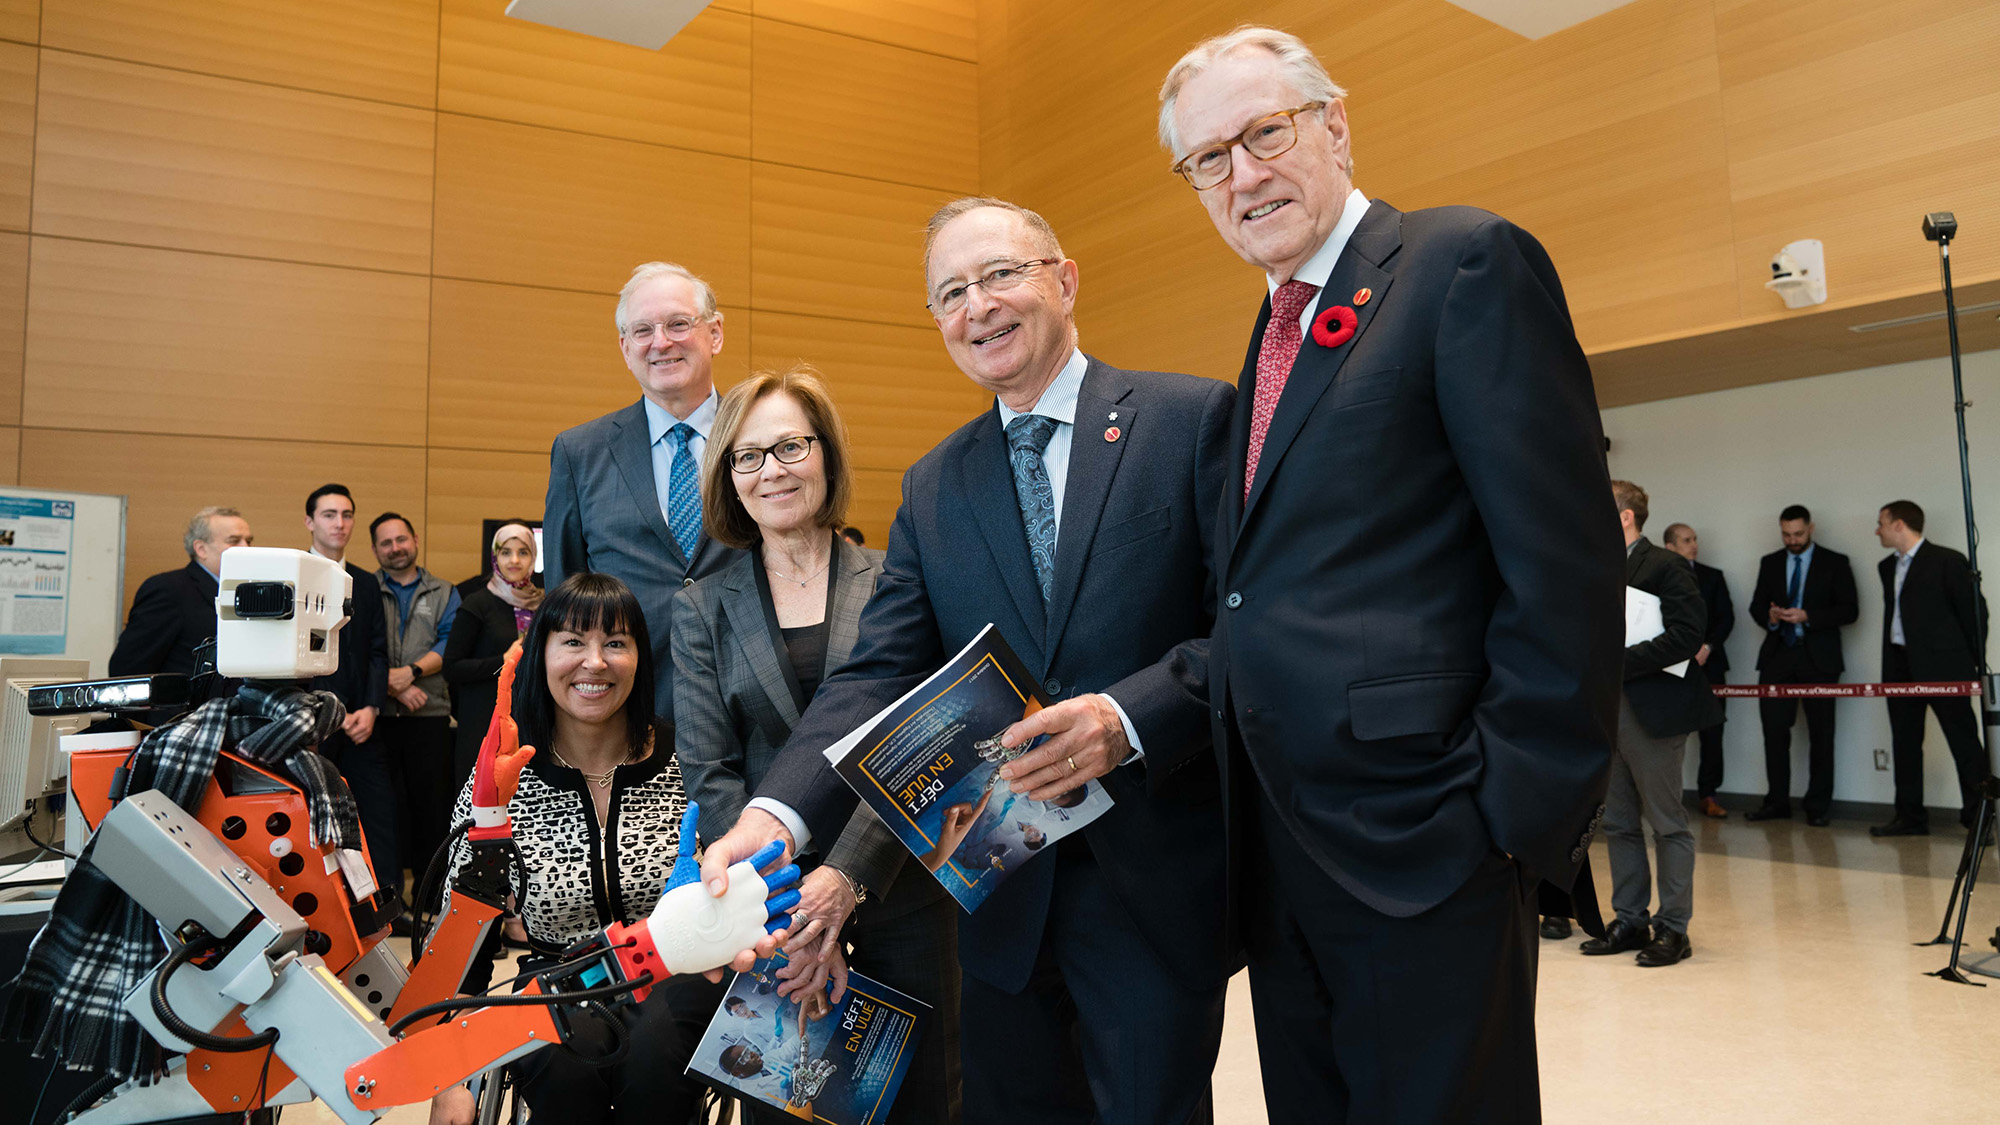 The committee released their report during an event @uOttawa where senators Kelvin Kenneth Ogilvie, Art Eggleton, Chantal Petitclerc and Judith Seidman witnessed these new technologies